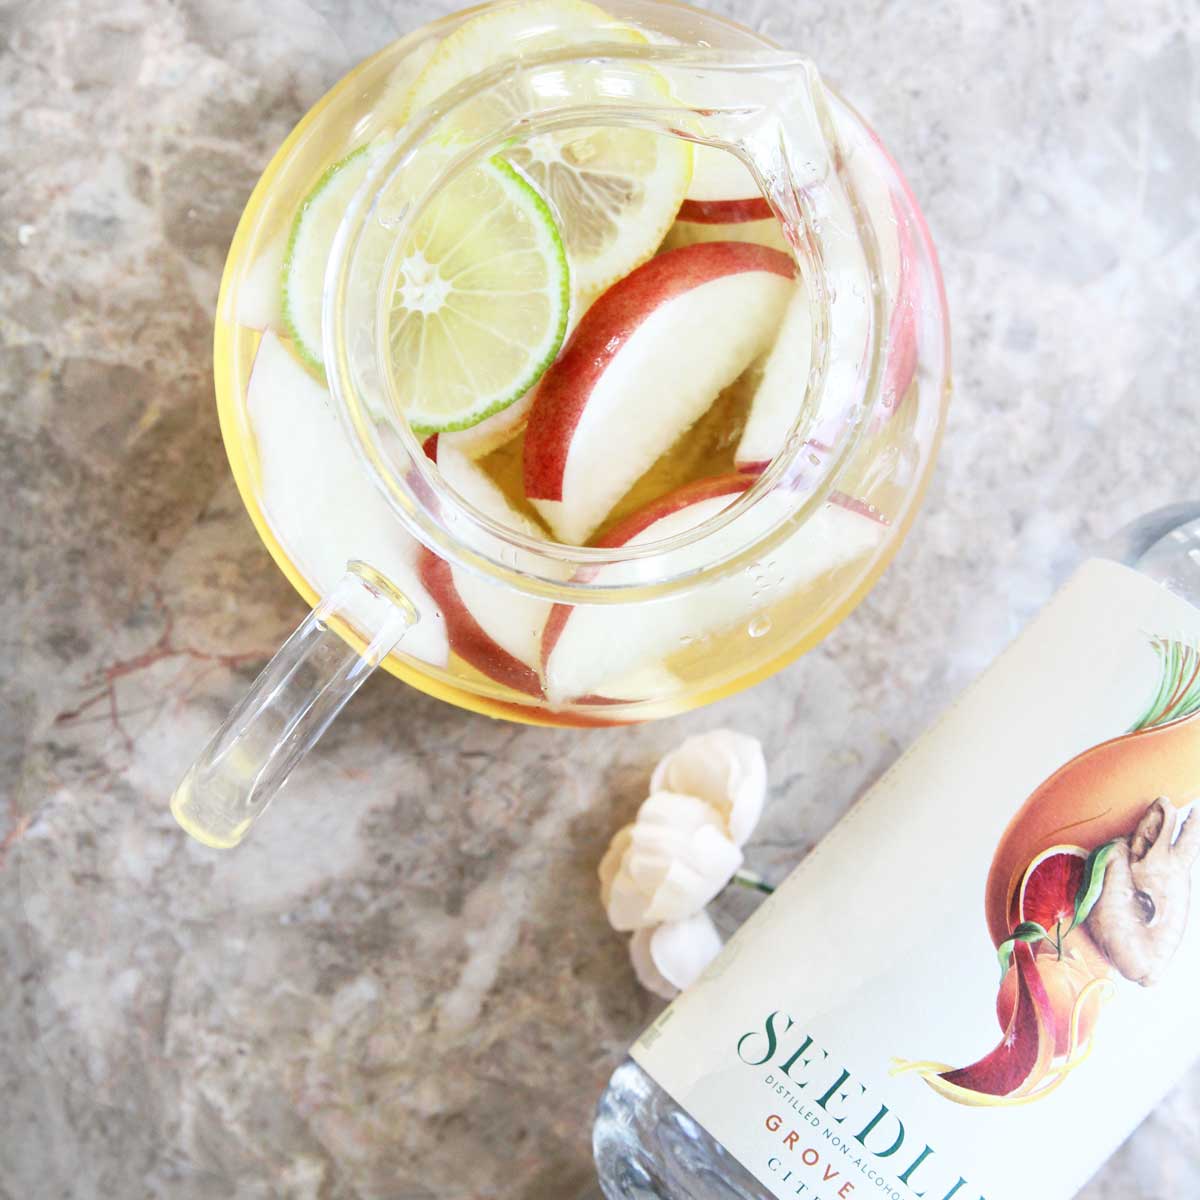 Non-Alcoholic White Sangria Made with Seedlip (Low Calorie) - Cranberry Pumpkin Bread